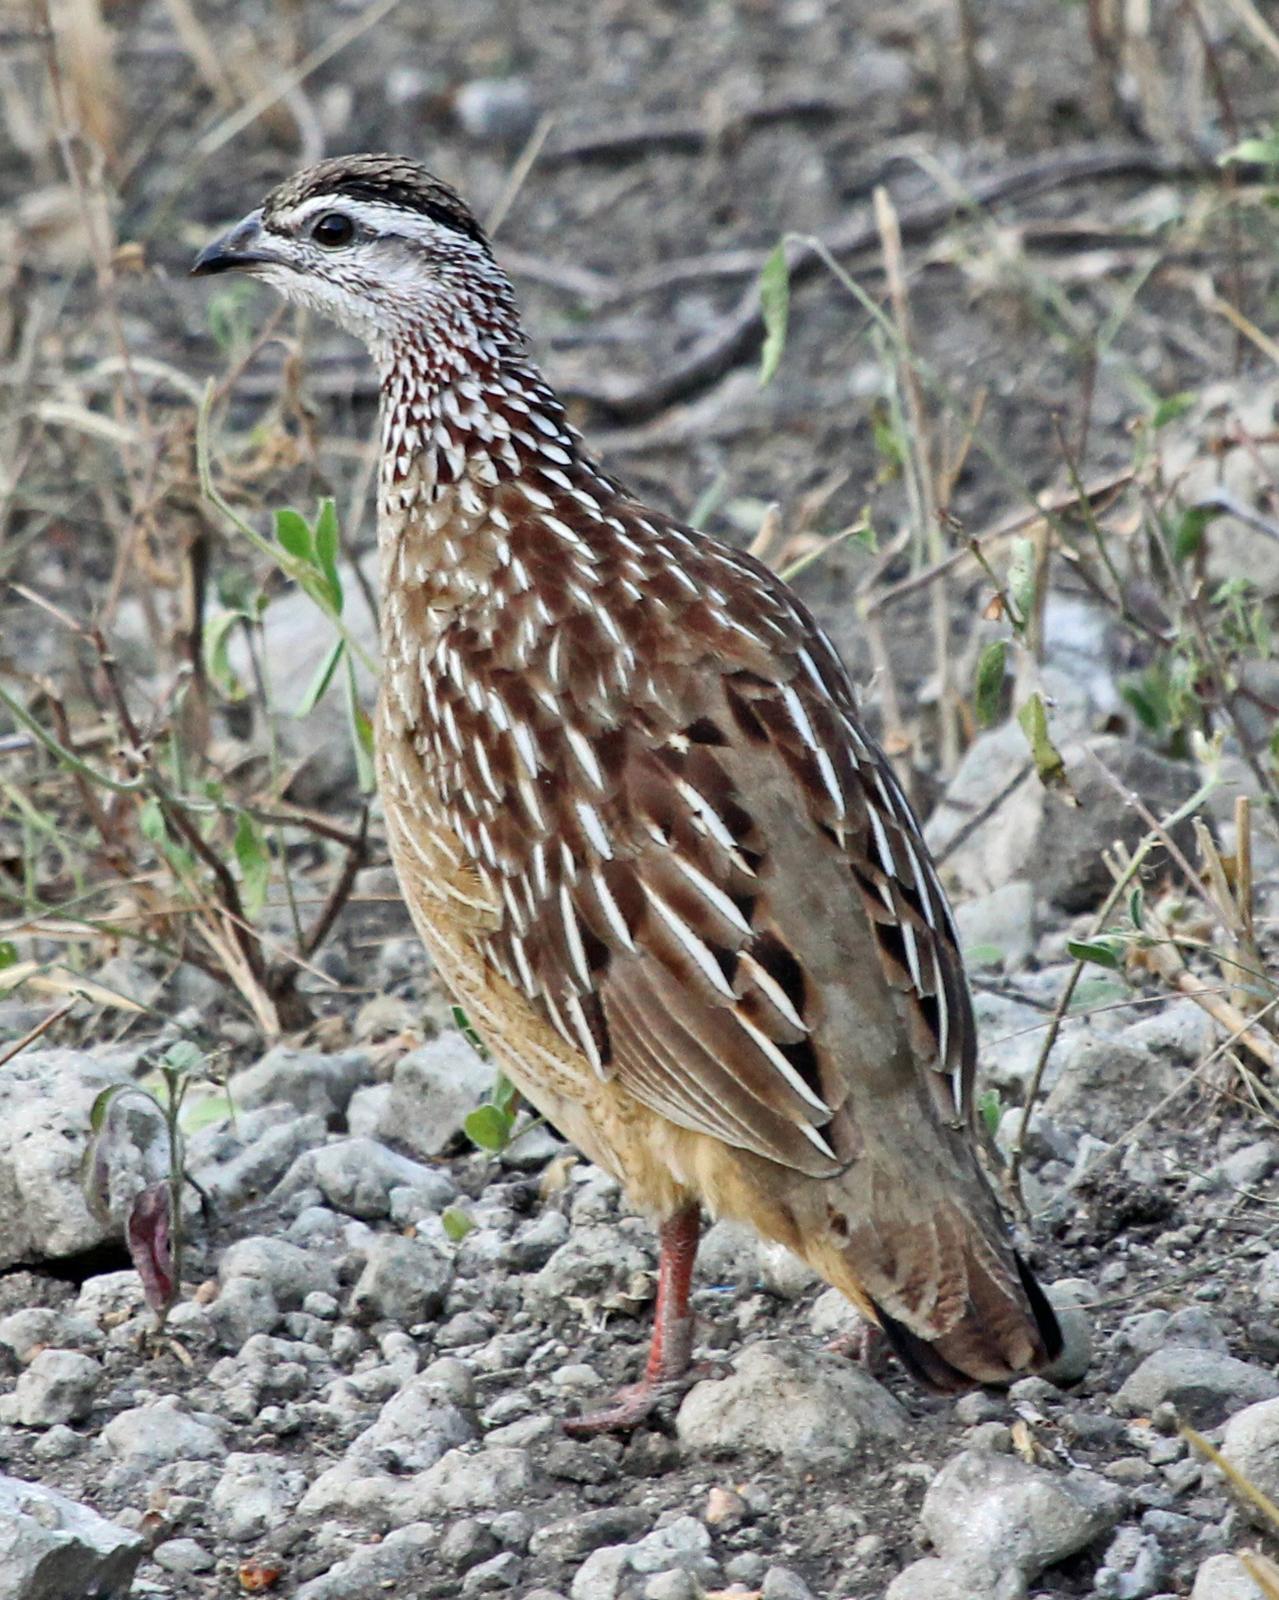 Crested Francolin Photo by Robert Polkinghorn